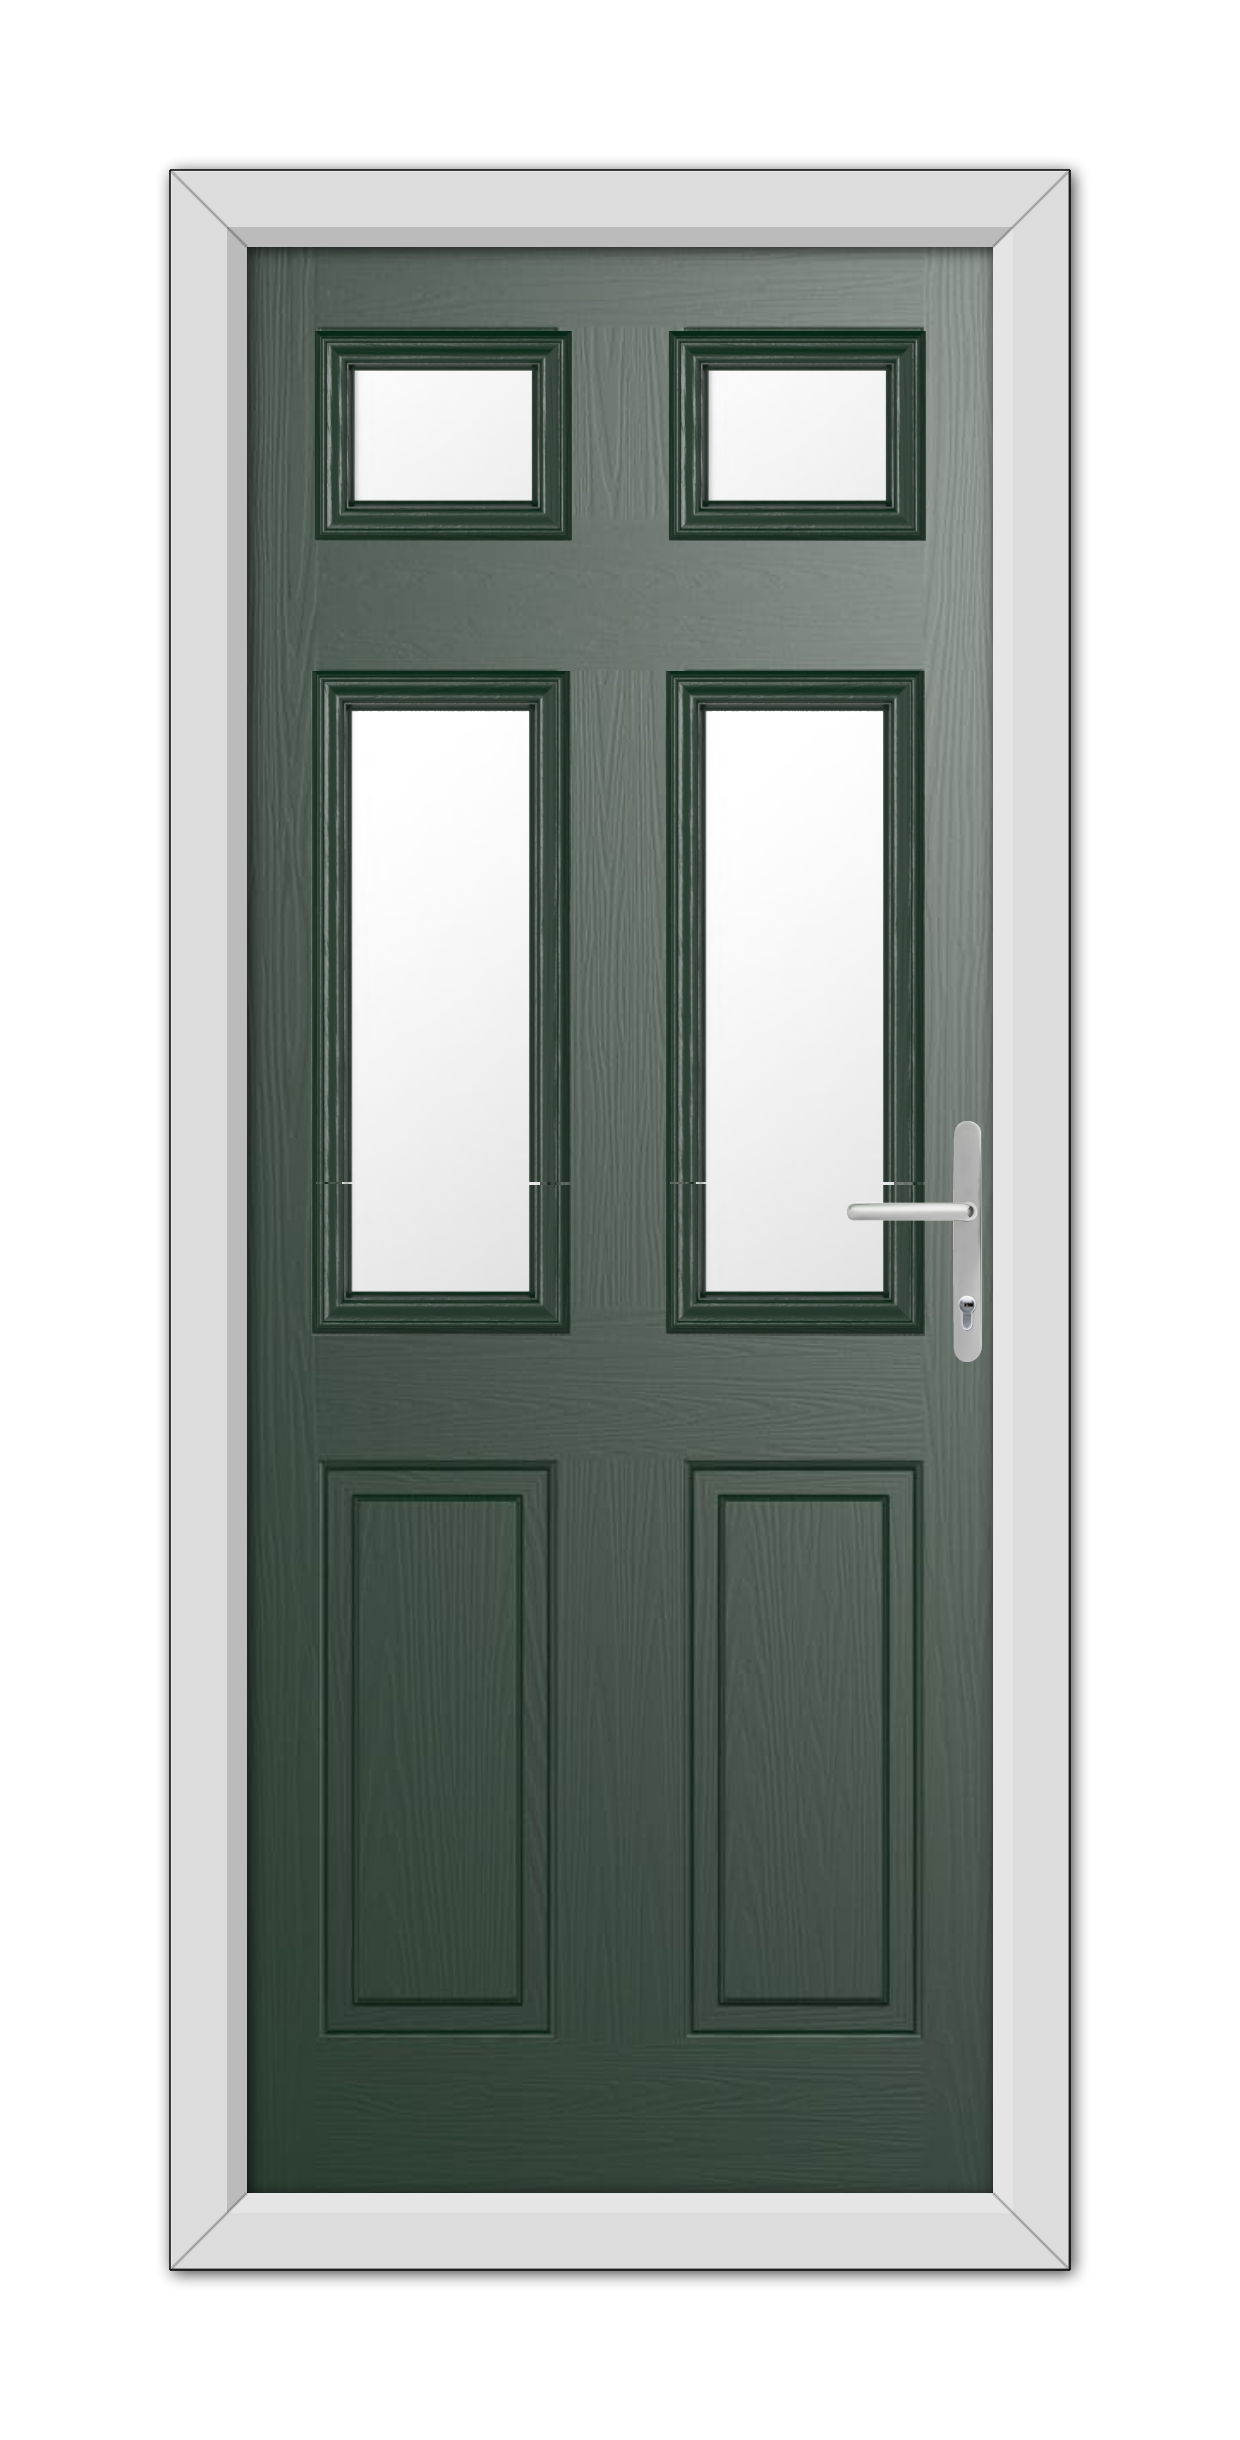 A Green Middleton Glazed 4 Composite Door 48mm Timber Core with rectangular glass panels and a silver handle, framed by a white door frame.